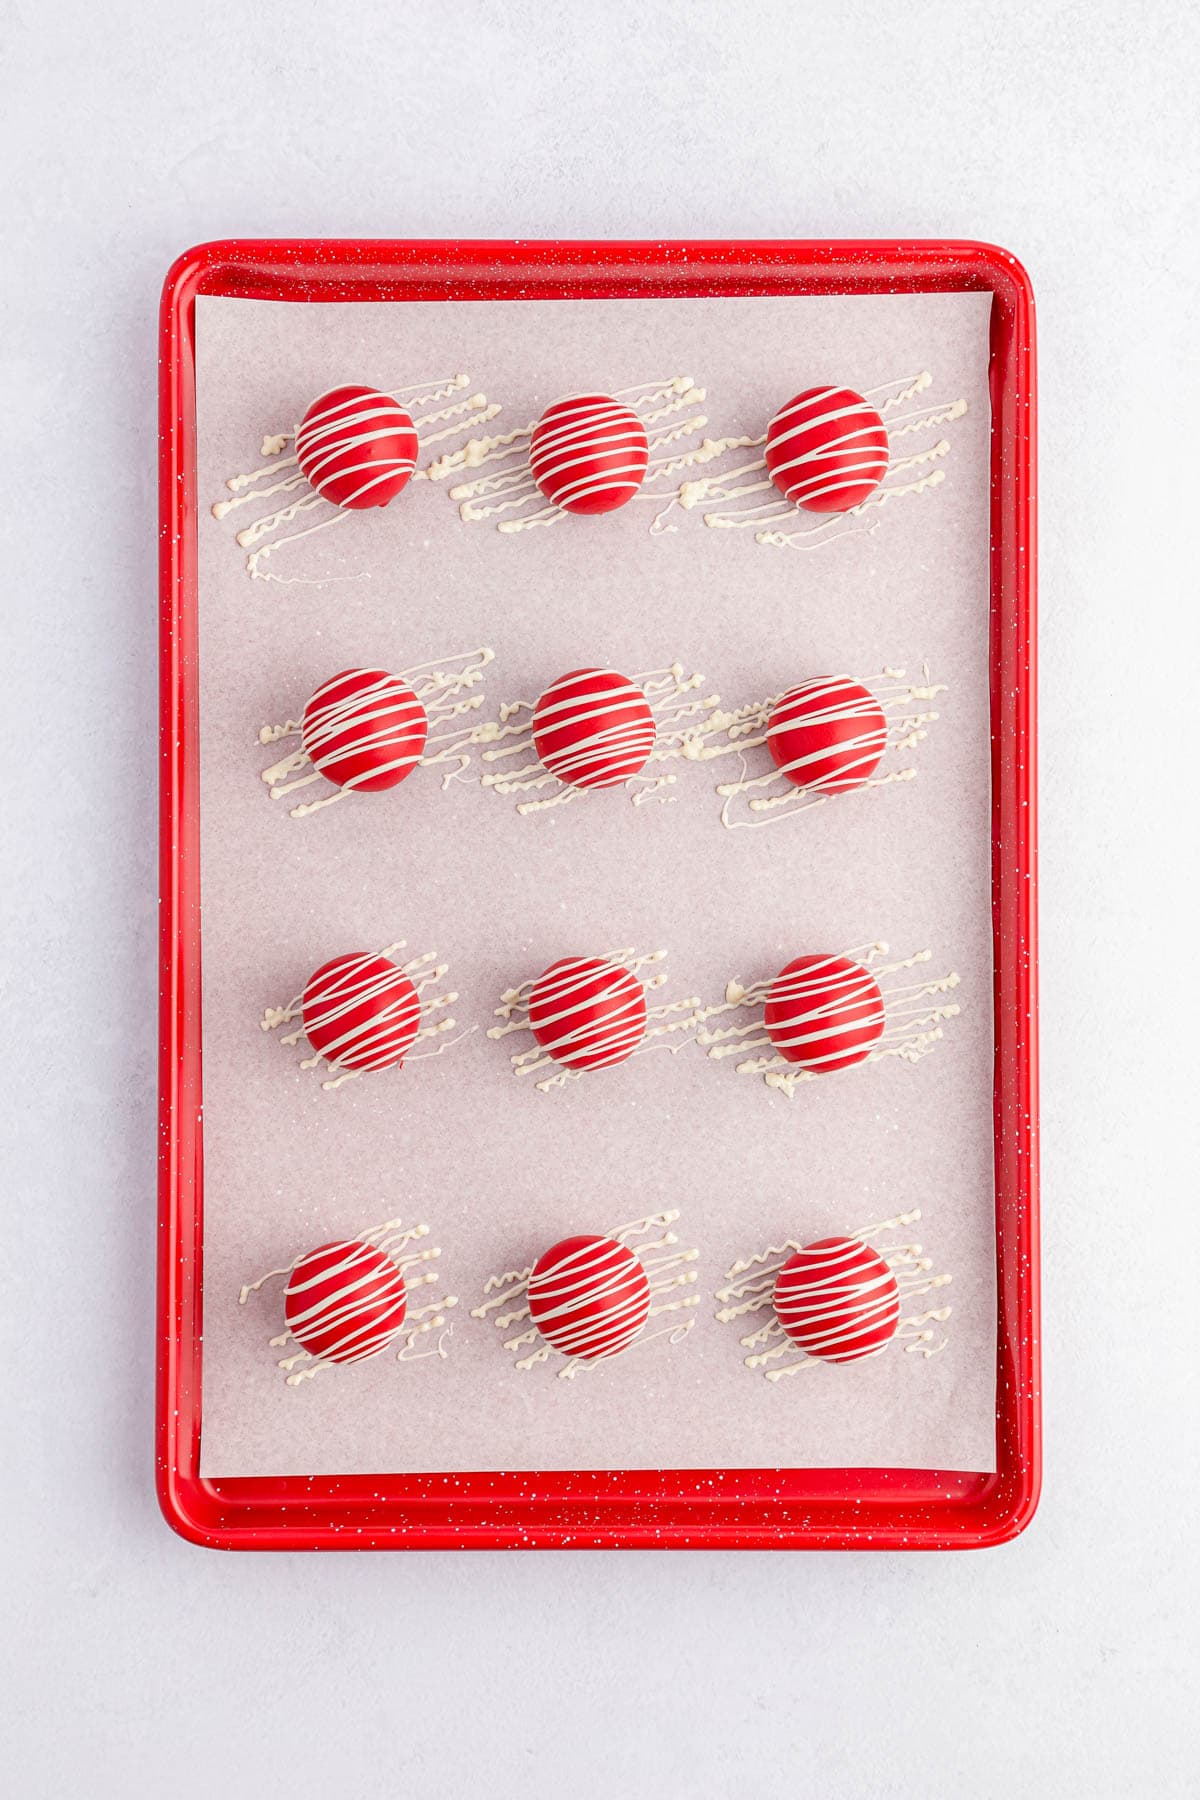 Red Oreo balls drizzled with white chocolate